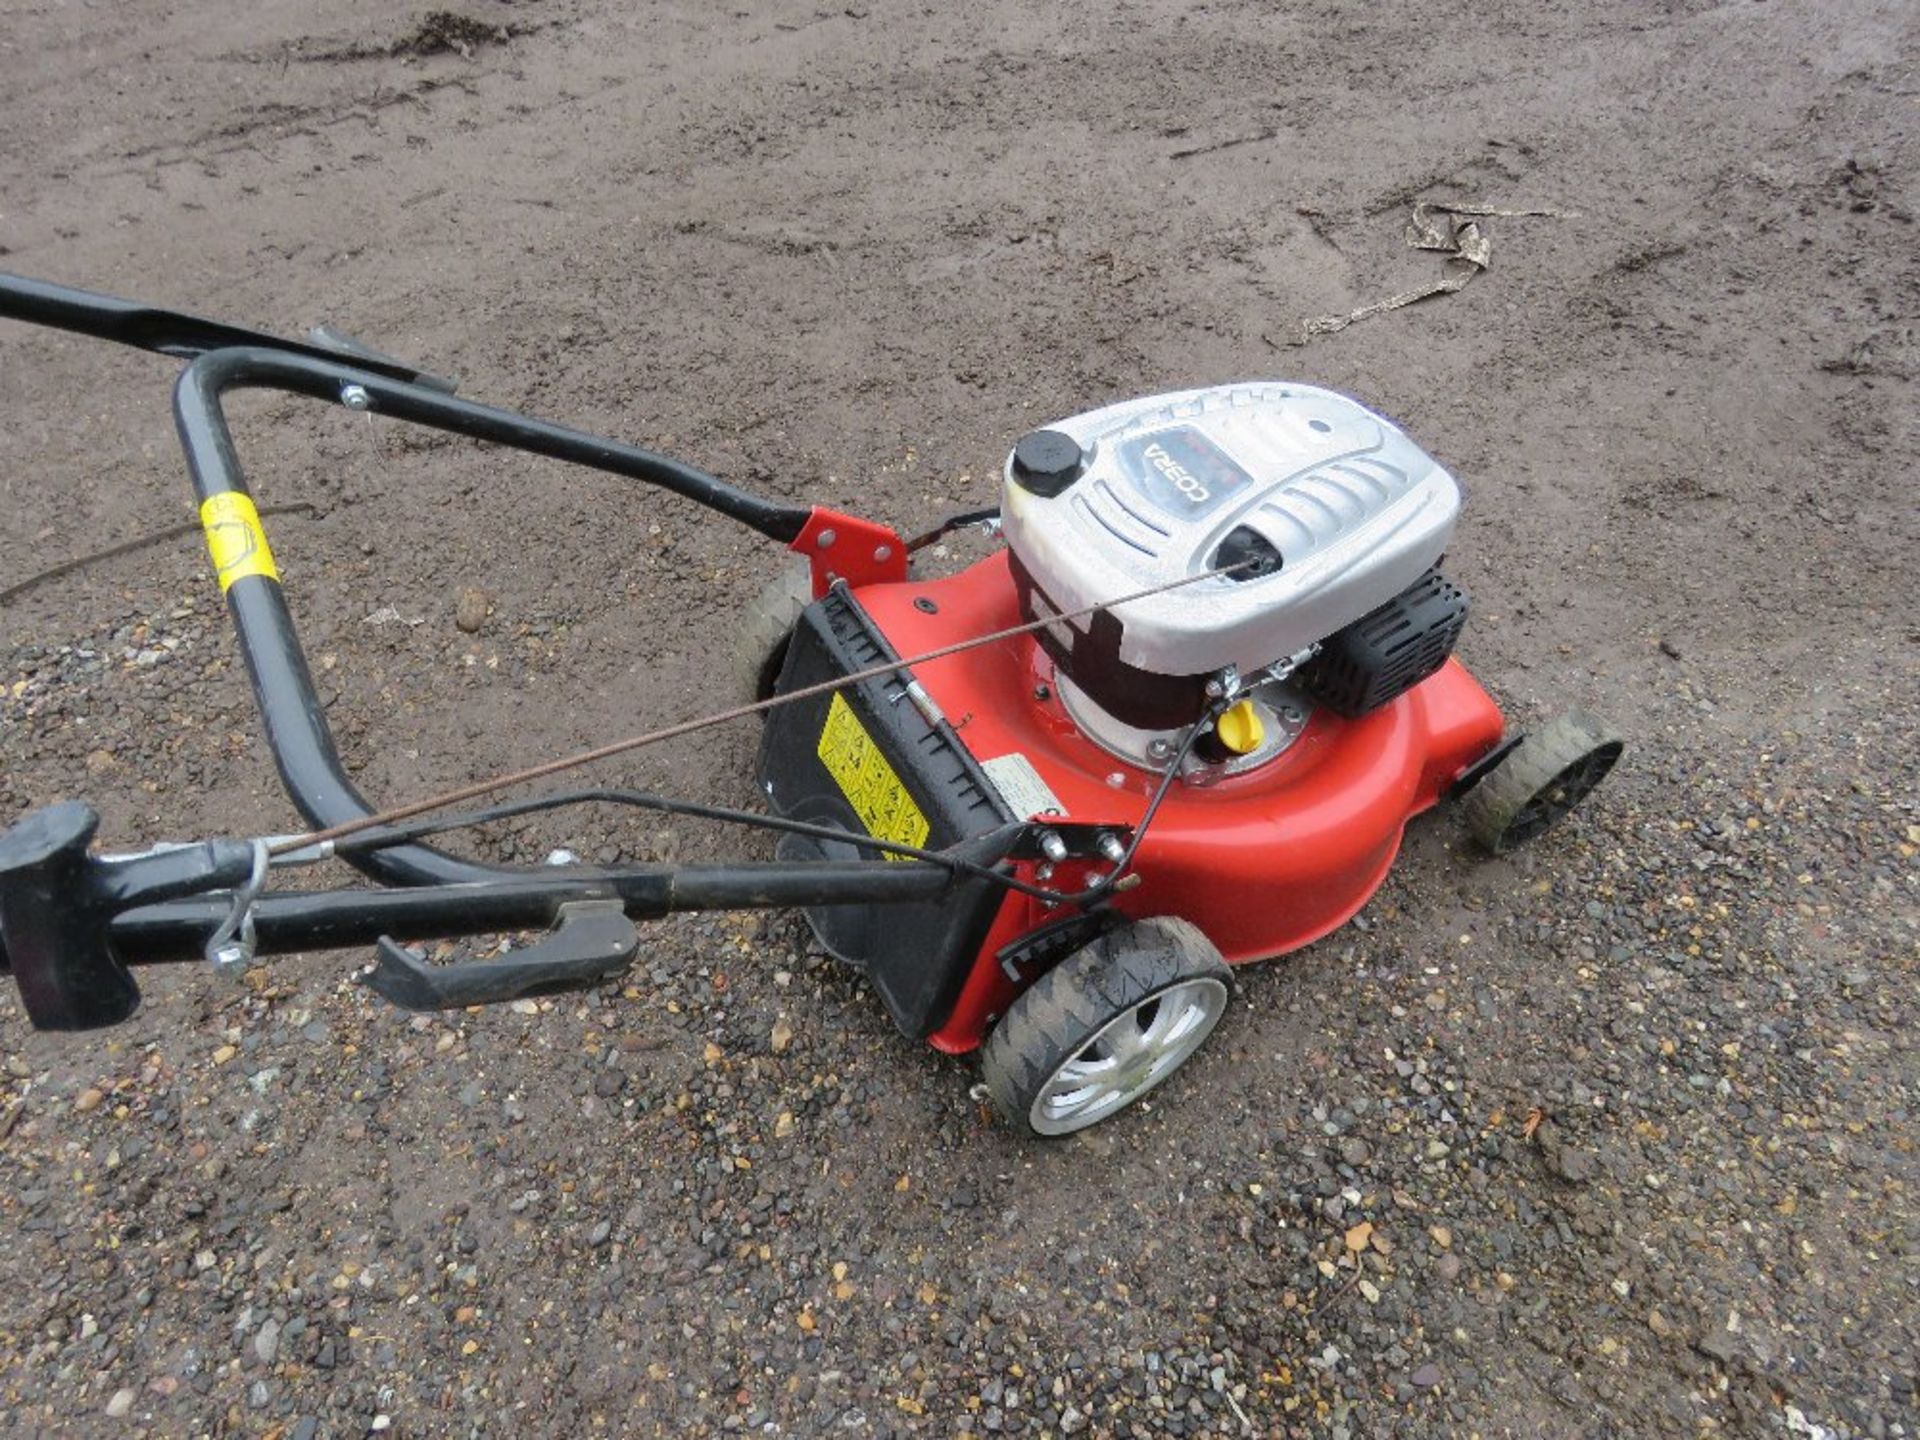 COBRA PETROL ENGINED ROTARY LAWNMOWER. NO COLLECTOR. THIS LOT IS SOLD UNDER THE AUCTIONEERS MARG - Image 3 of 3